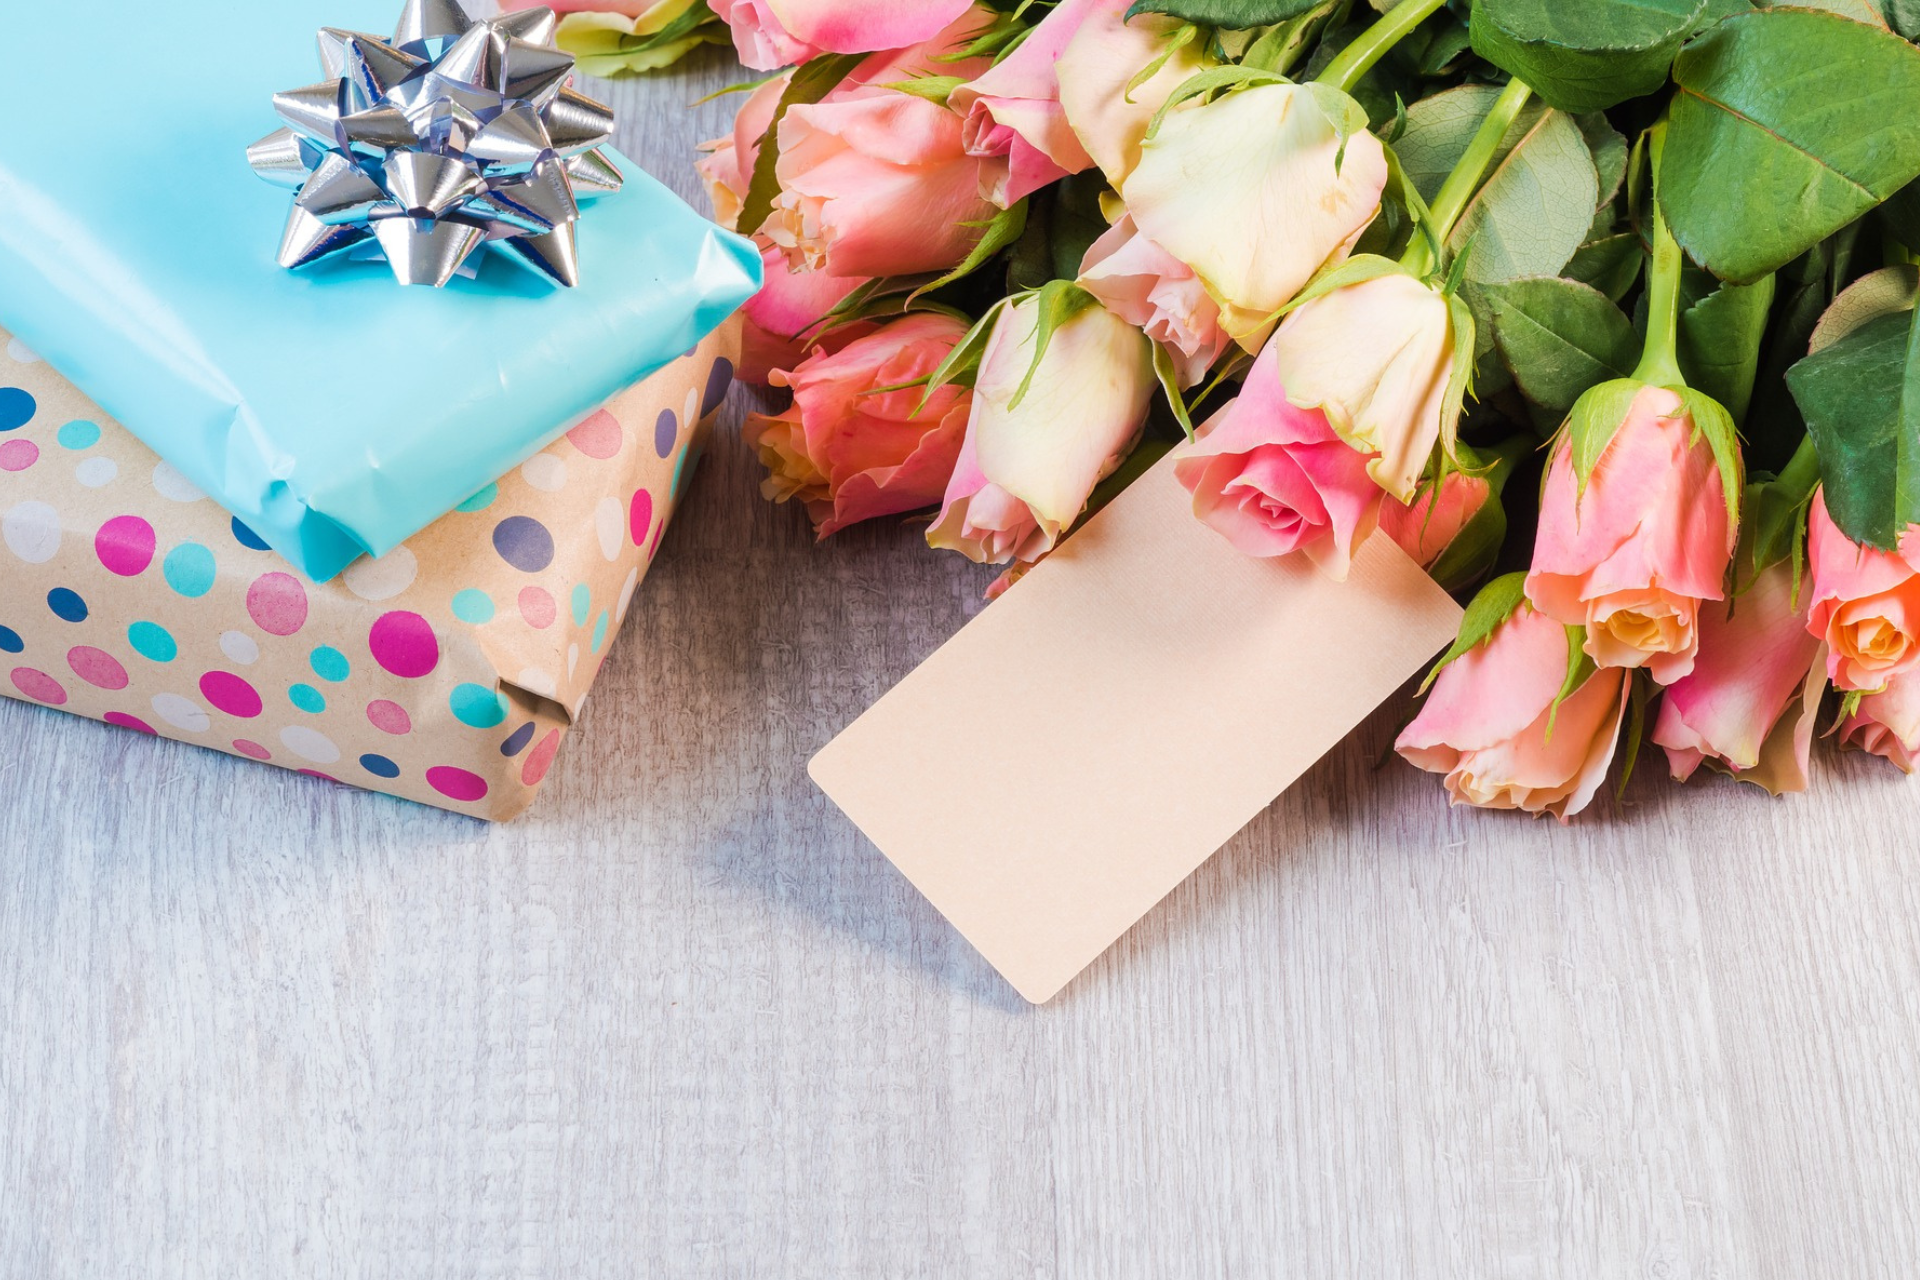 Deal of the Day - by Capitol Hill Florist, Gifts & Flower Delivery